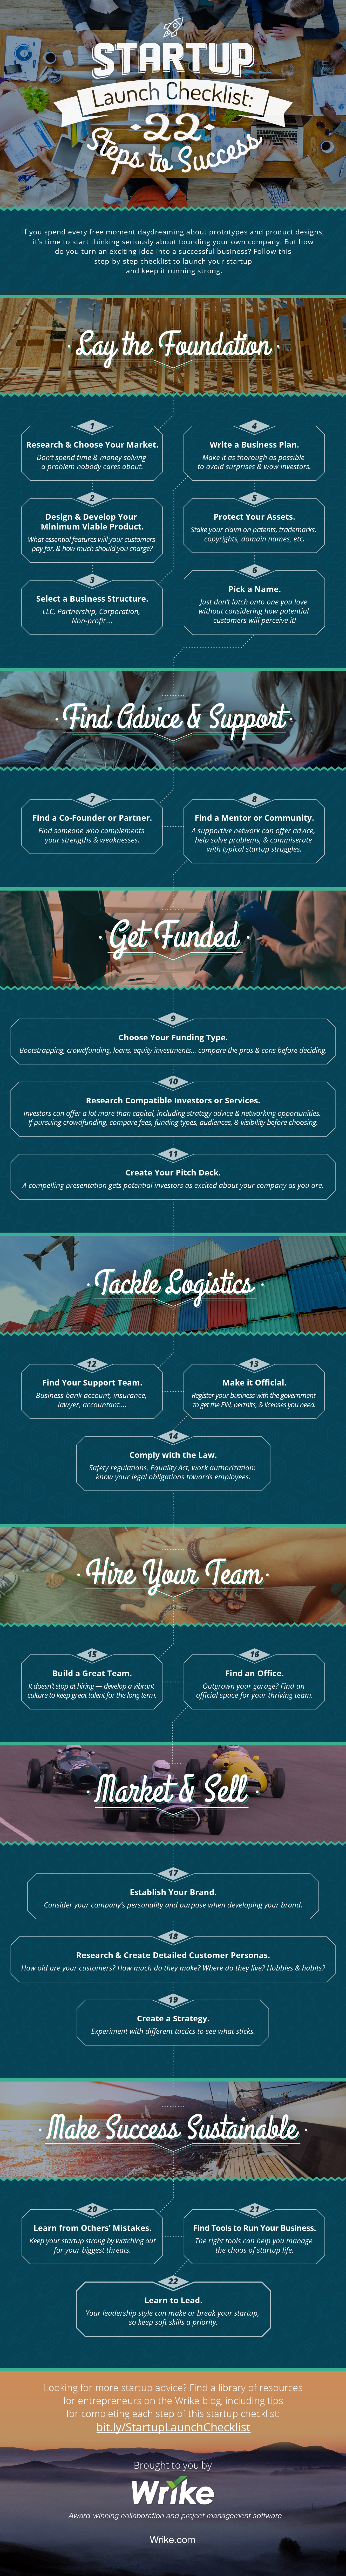 Startup Launch Checklist: 22 Steps to Success (#Infographic)